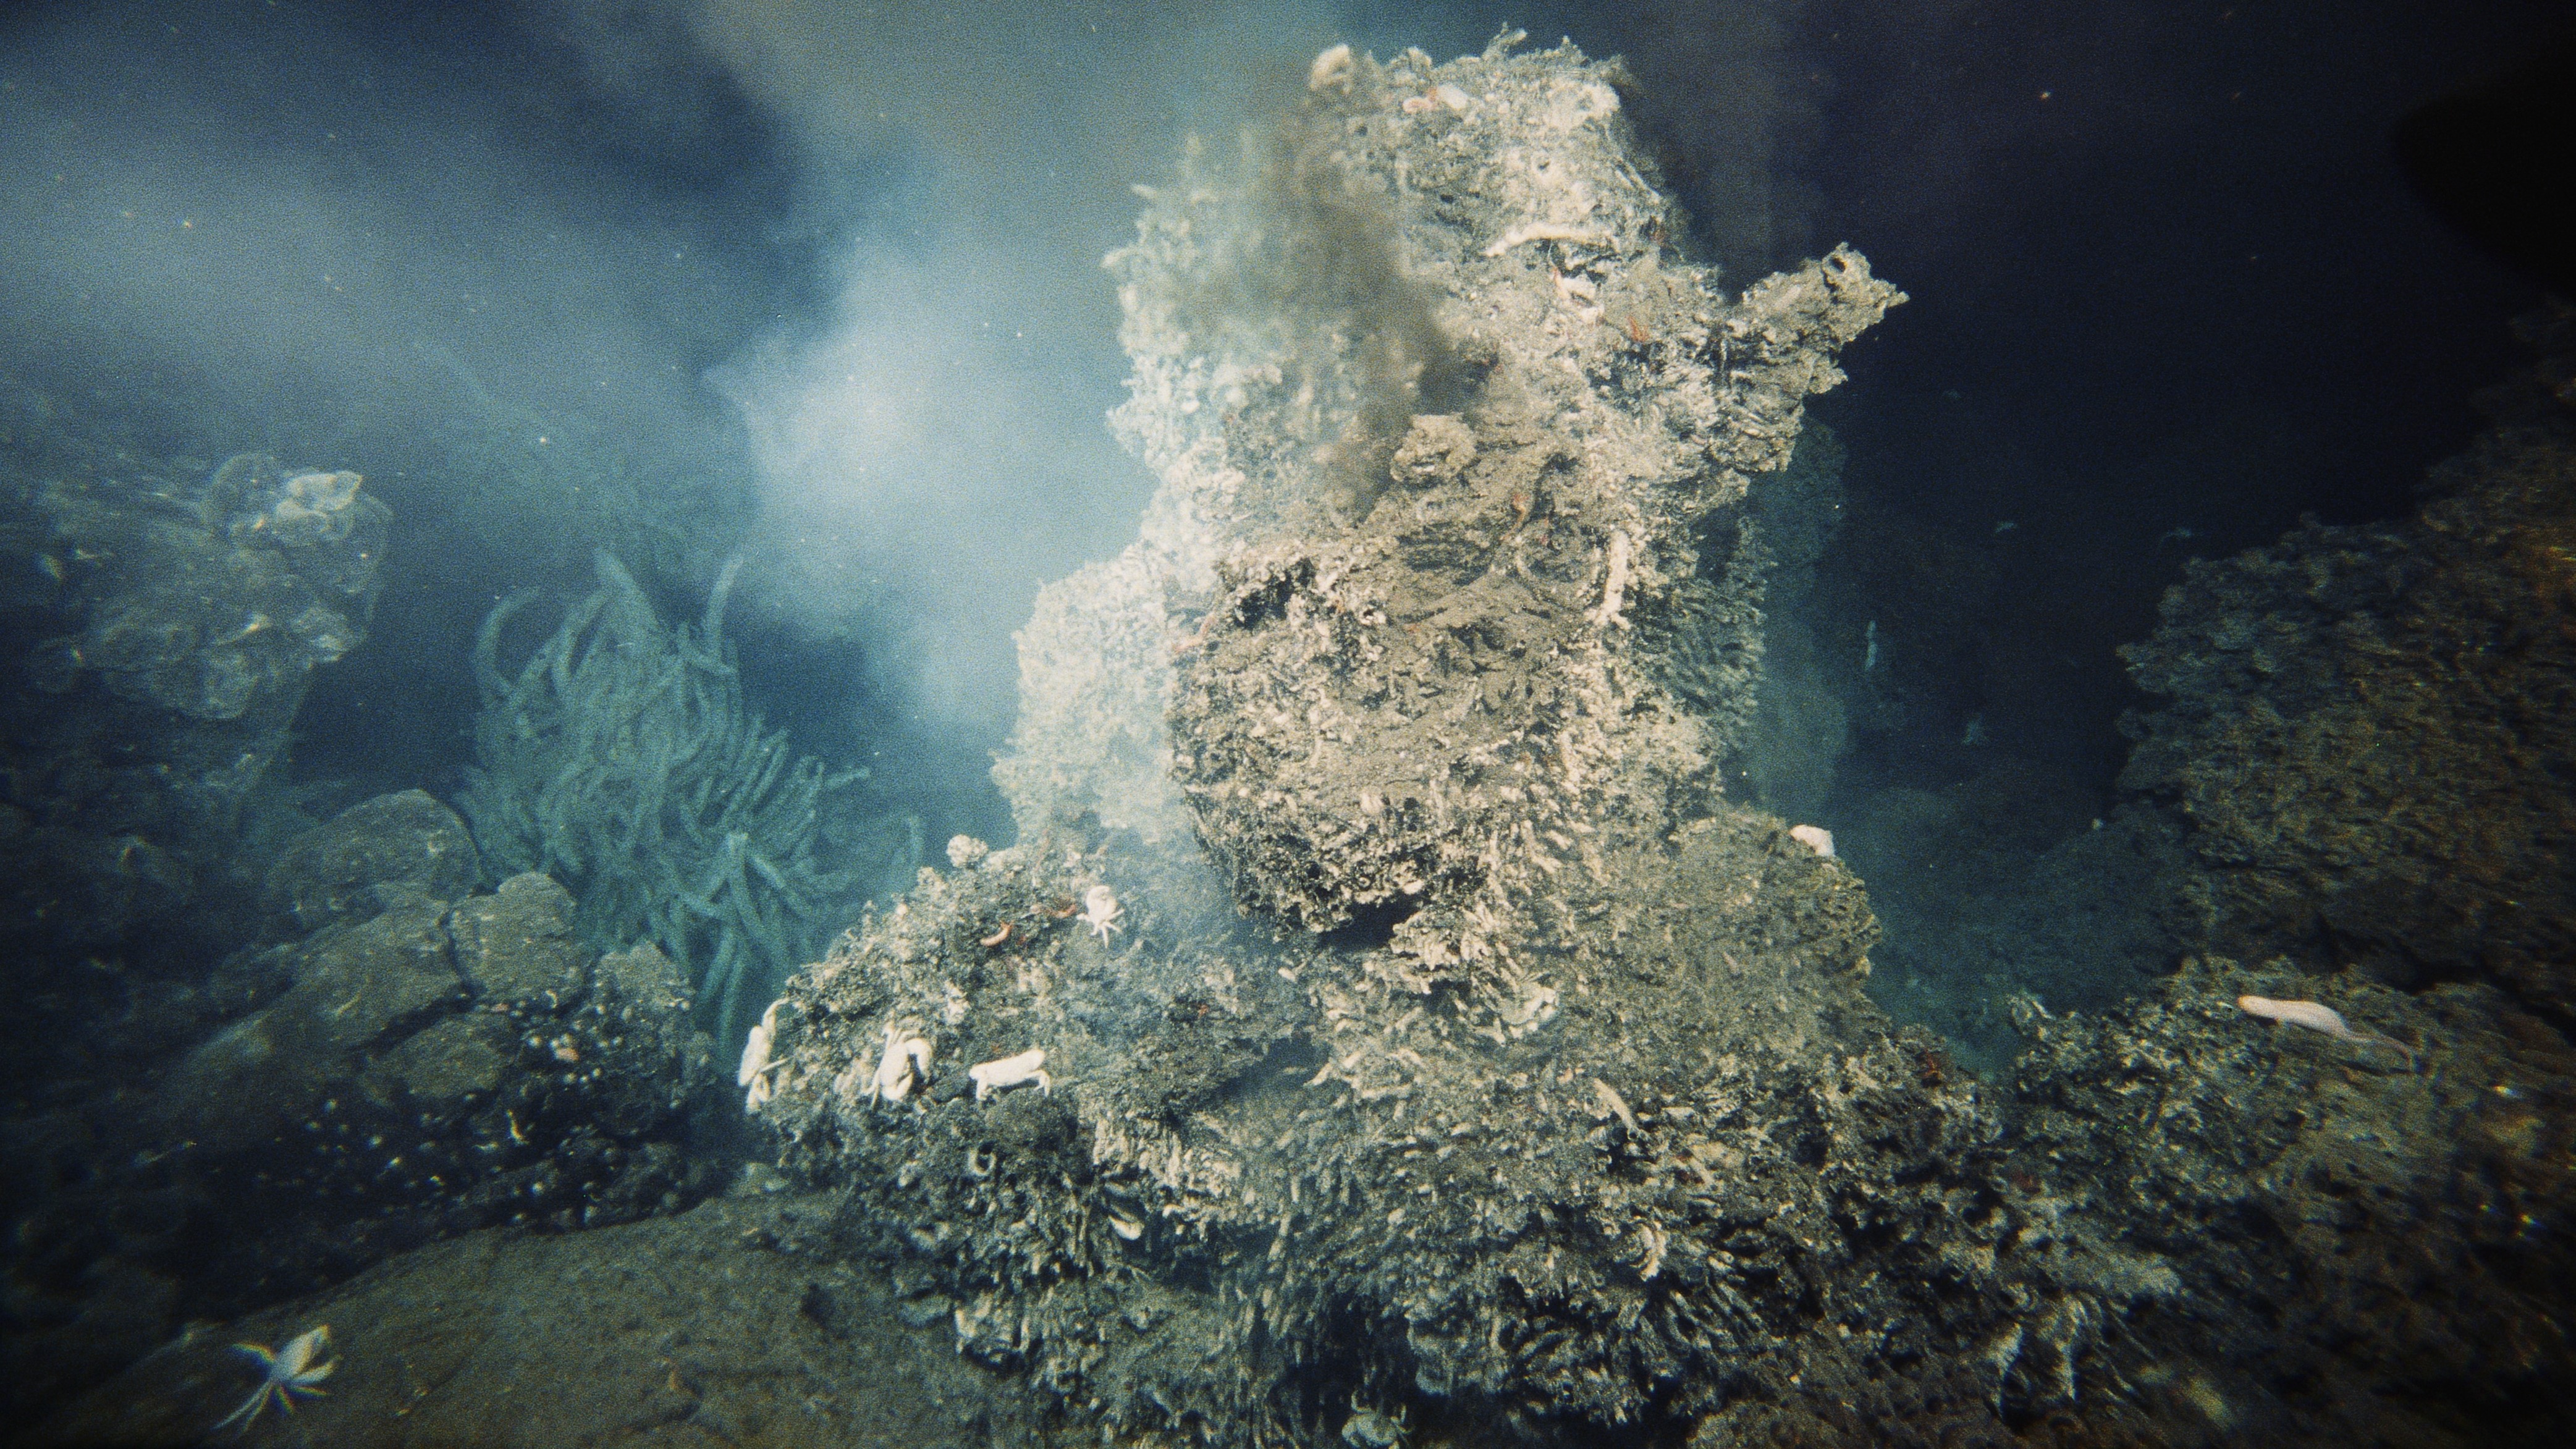 Hydrothermal vents, although intolerable to humans, are home to crabs, tubeworms and many other kinds of life.